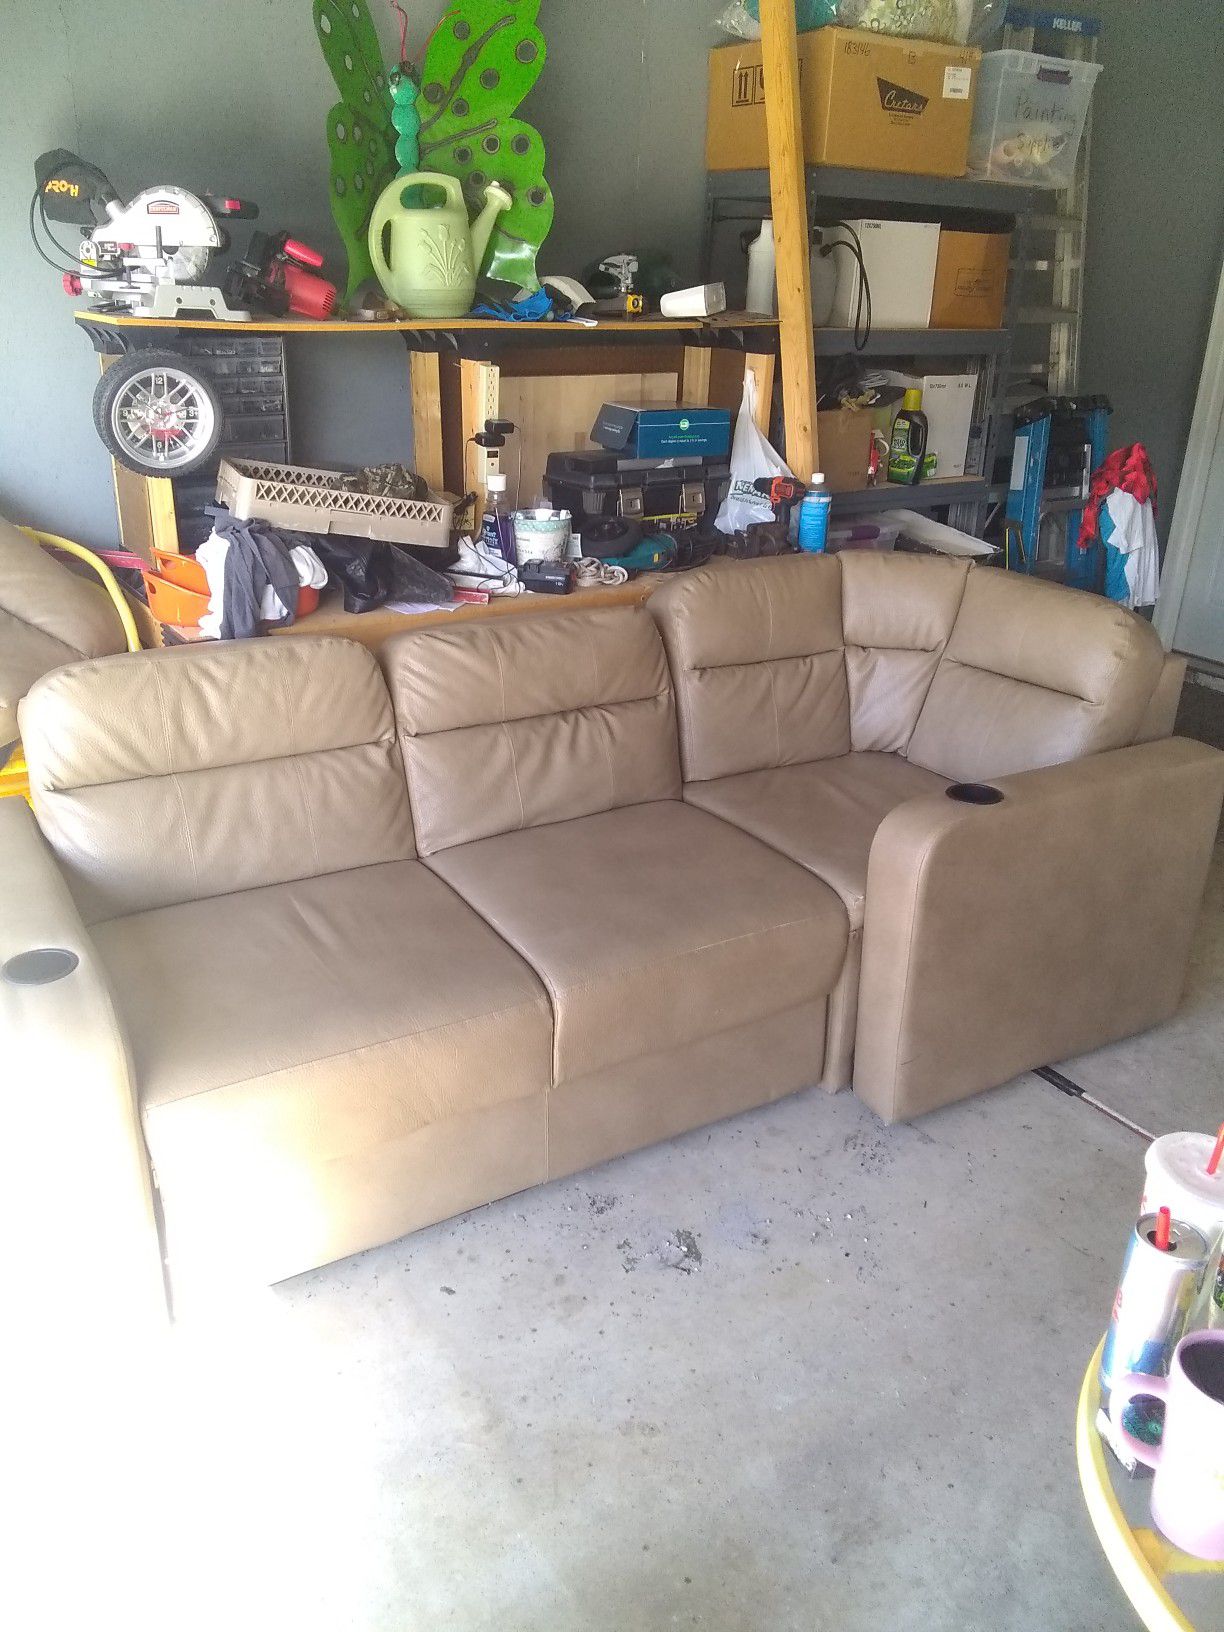 Tan leather couch and sectional